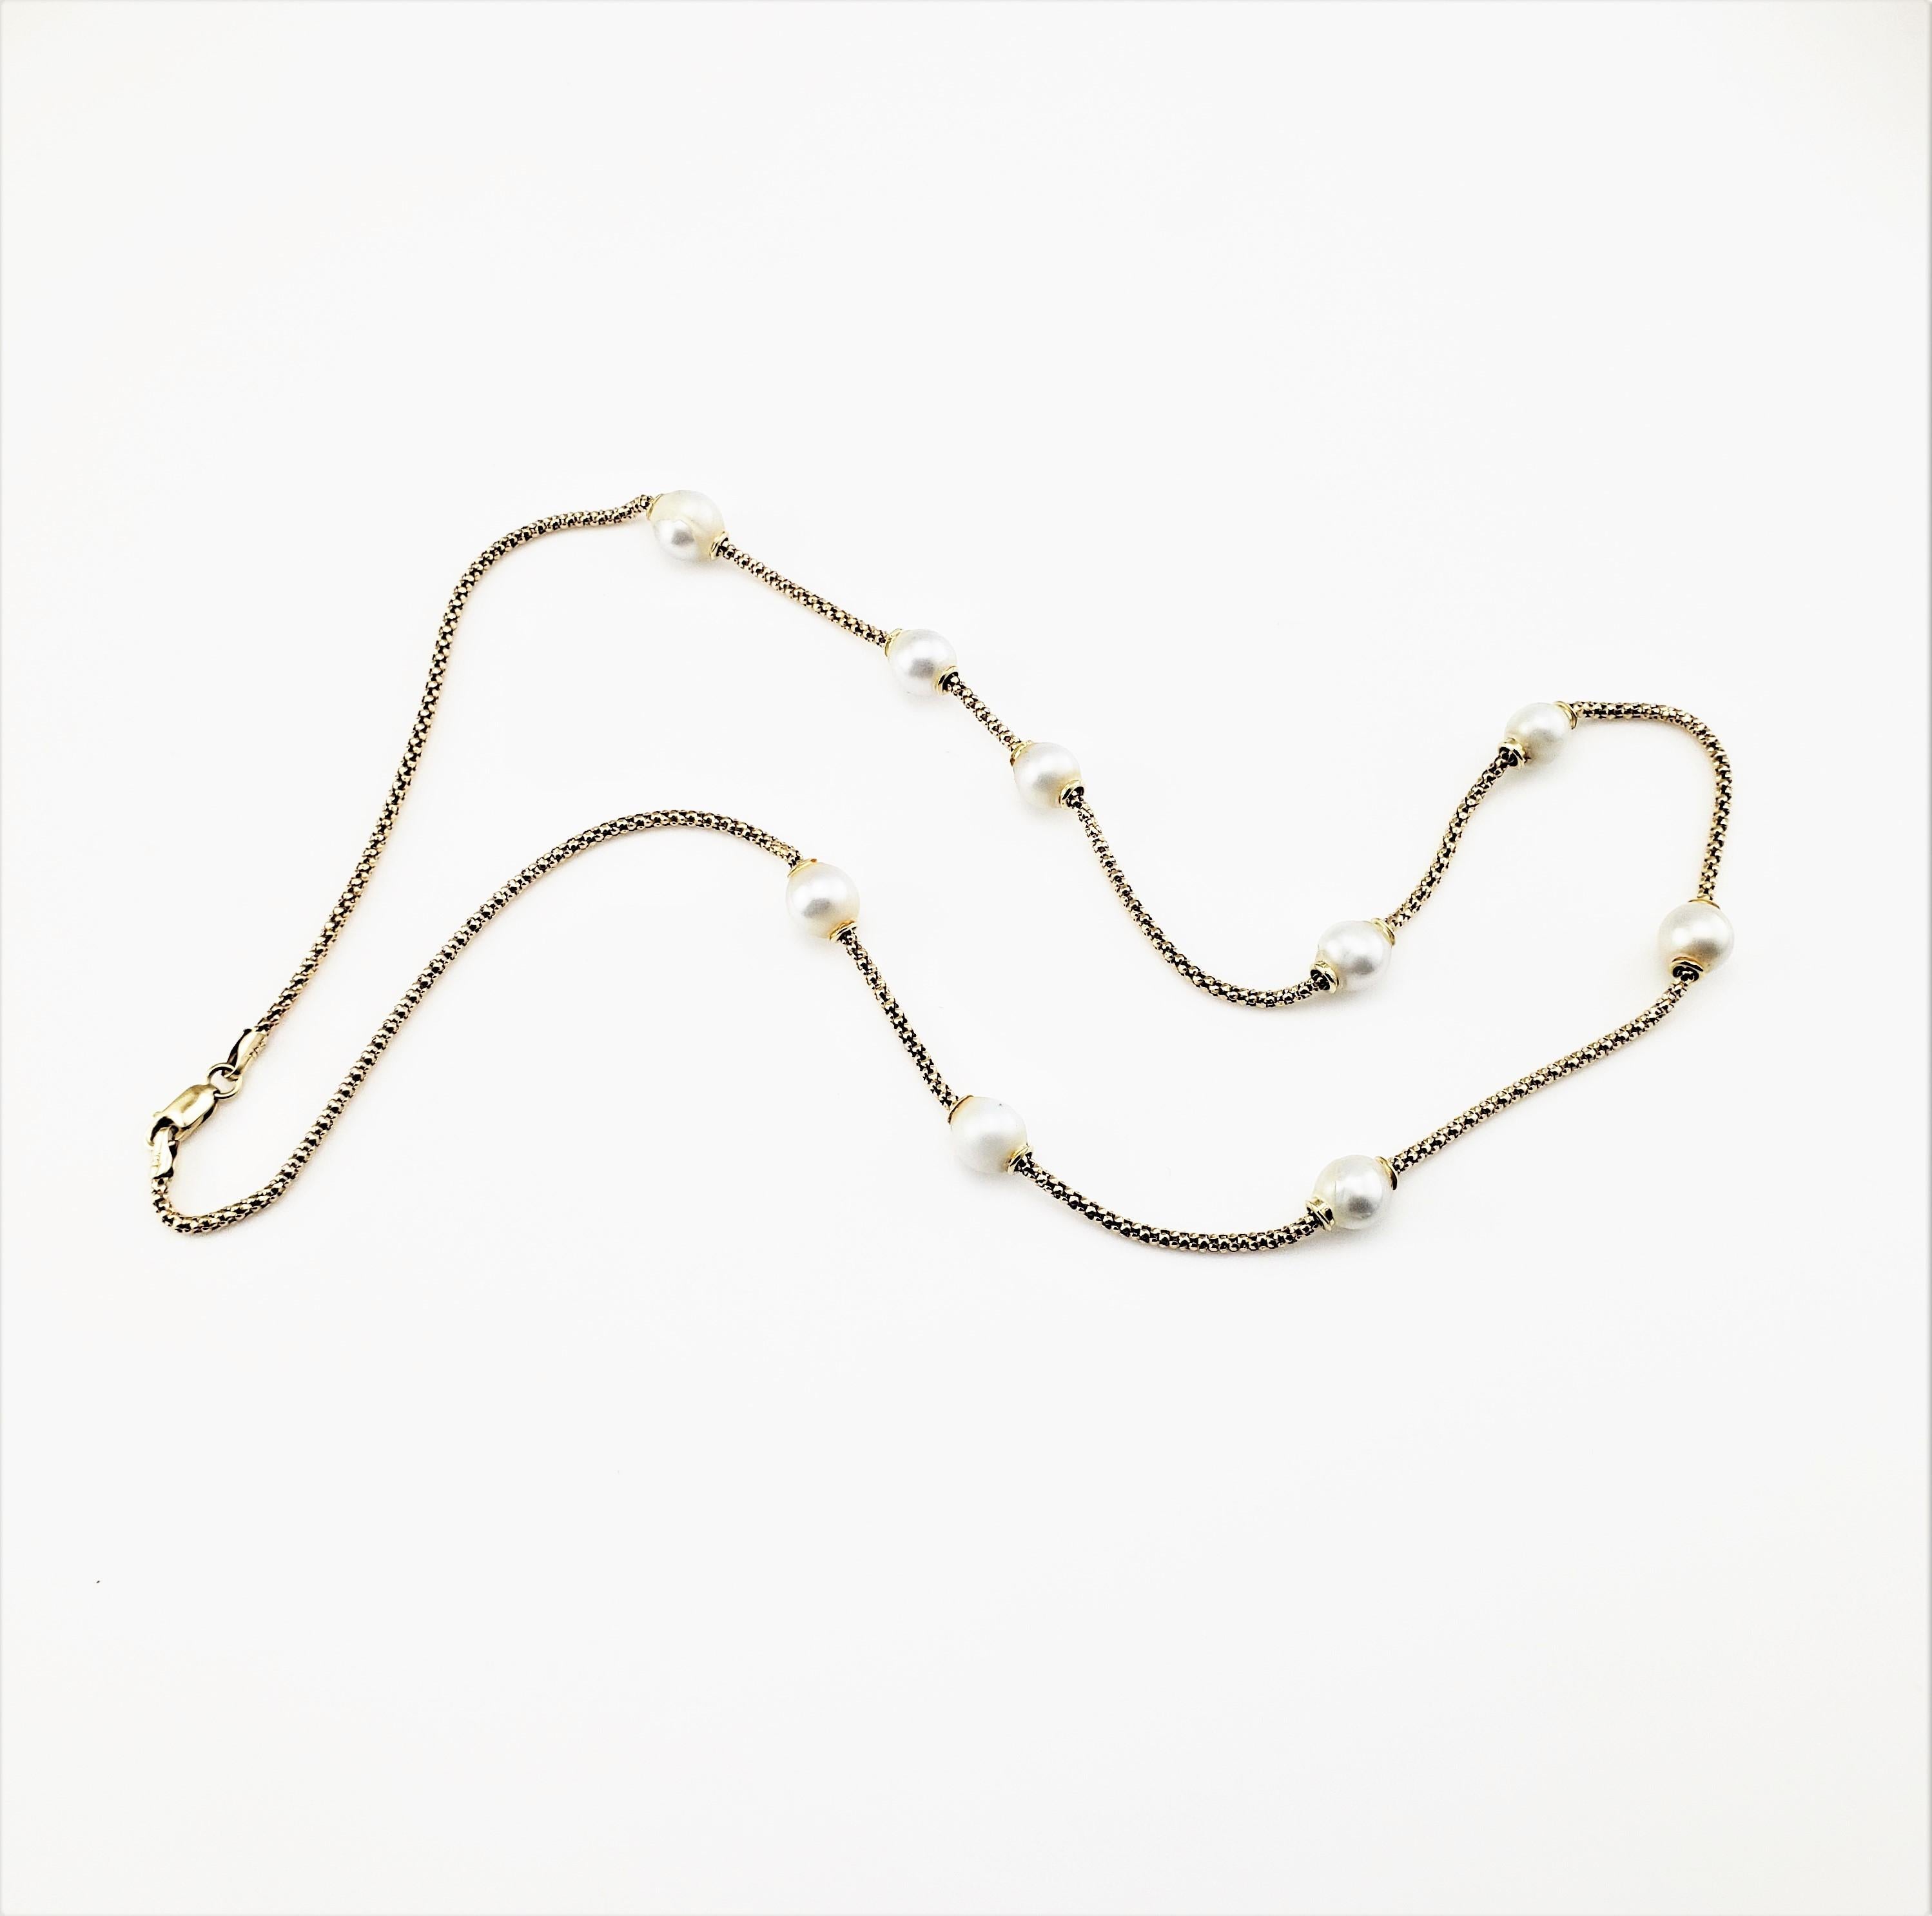 14 Karat Yellow Gold and Pearl Necklace-

This lovely necklace features nine white pearls (7 mm each) on an elegant 14K yellow gold necklace.

Size:  19  1/4 inches 

Weight: 5.0 dwt. / 7.8 gr.

Stamped:  585

Very good condition, professionally